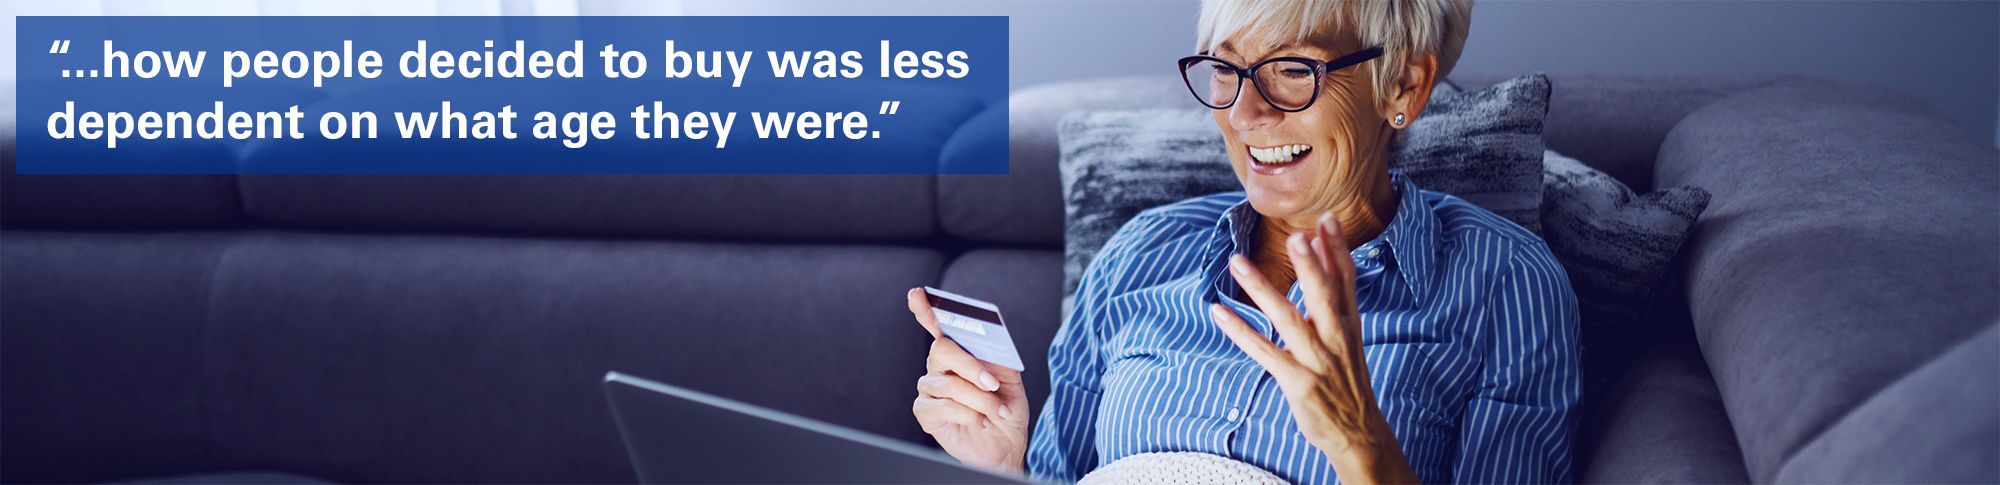 Woman shopping online with text overlaid "how people decided to buy was less dependent on what age they were."